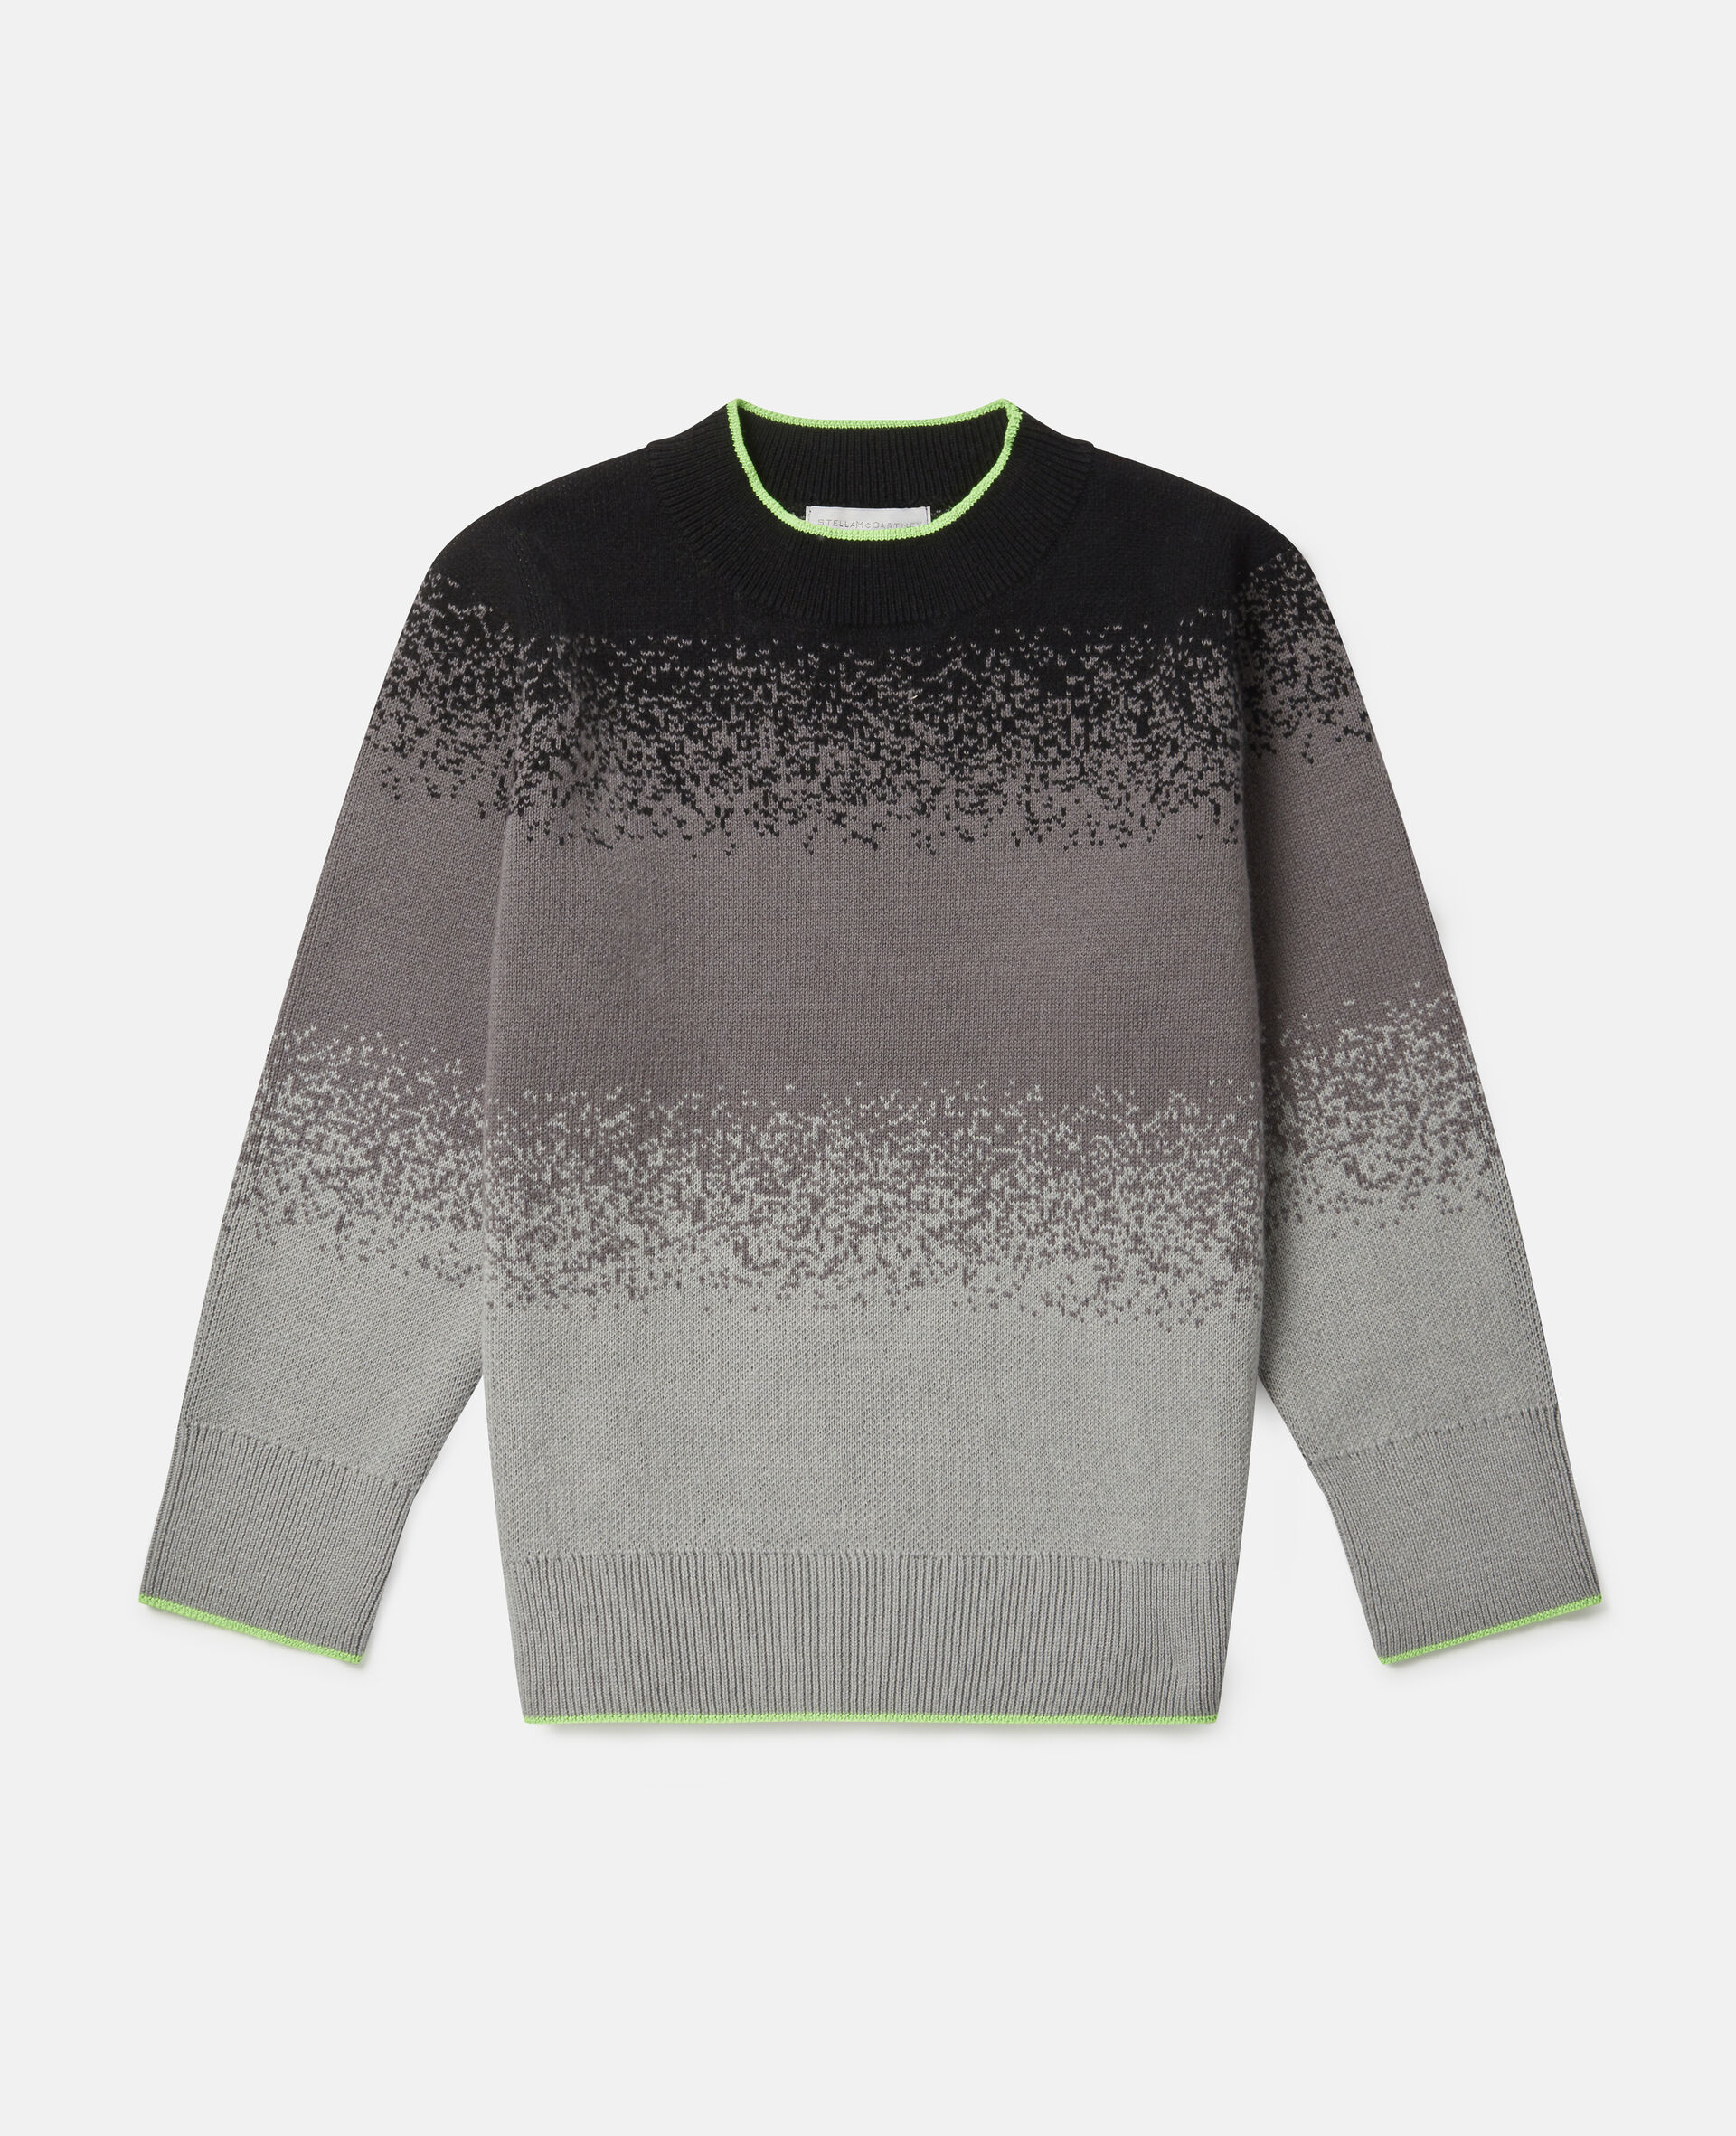 Spray Painted Effect Oversized Knit Sweater-Grey-large